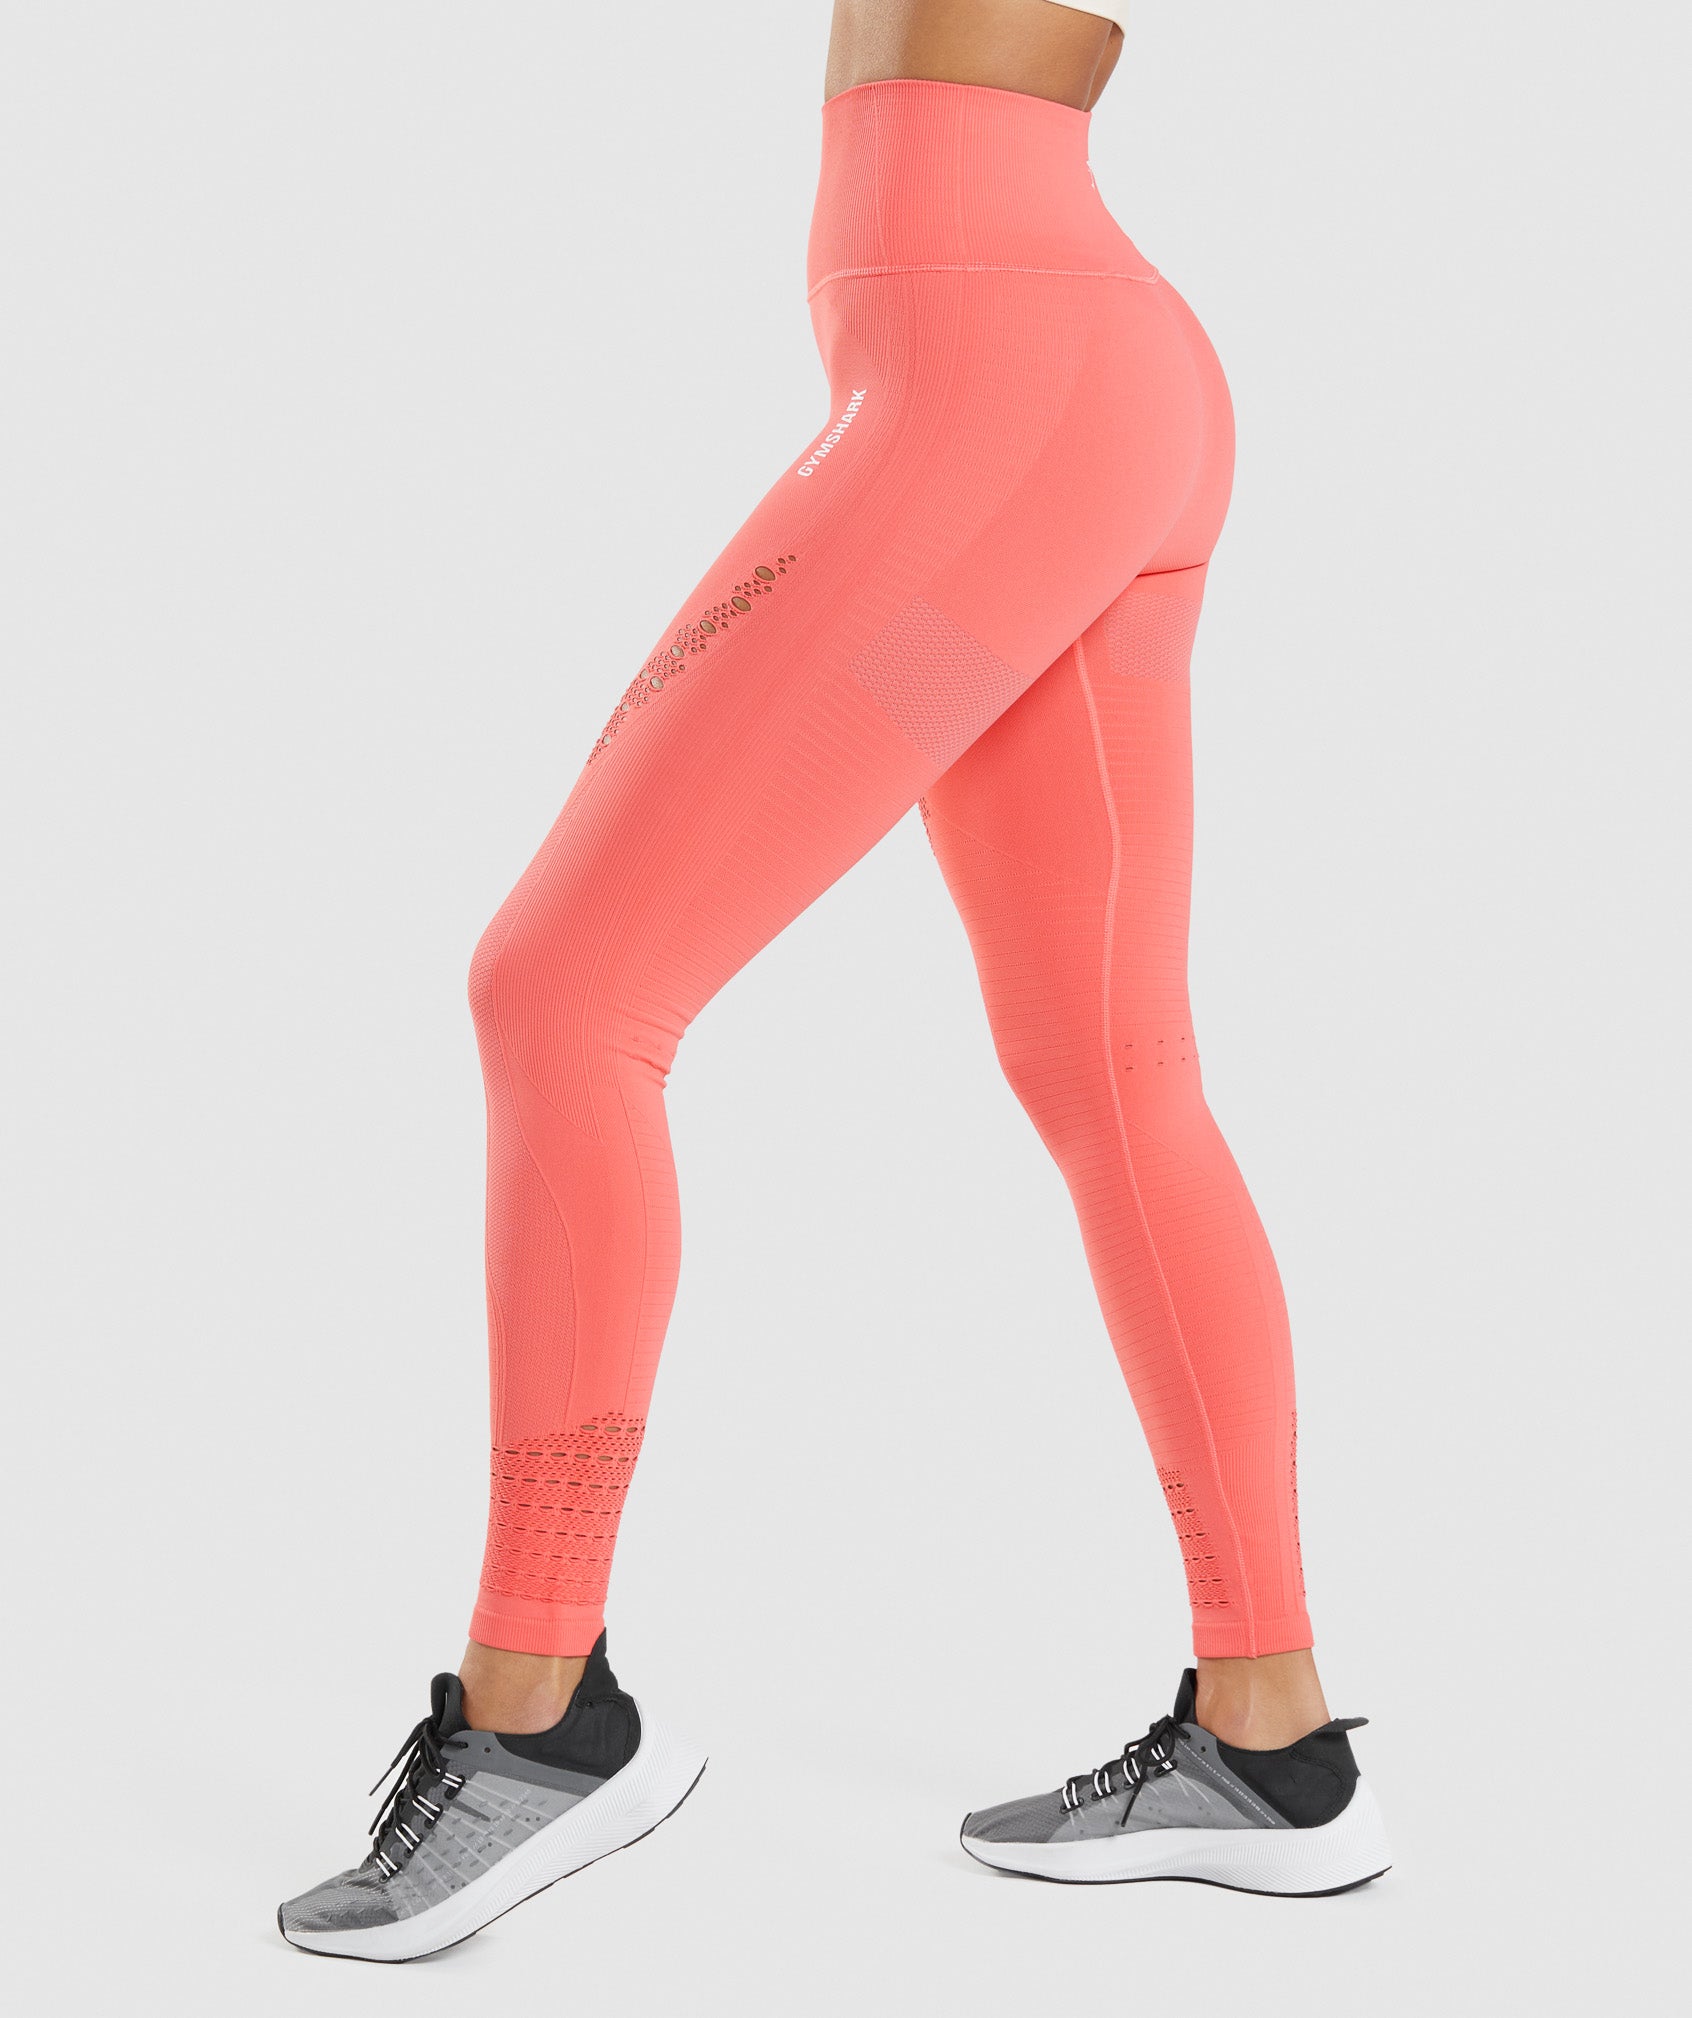 Buy Seamless Workout Tights - Order Bottoms online 5000008265 - PINK US